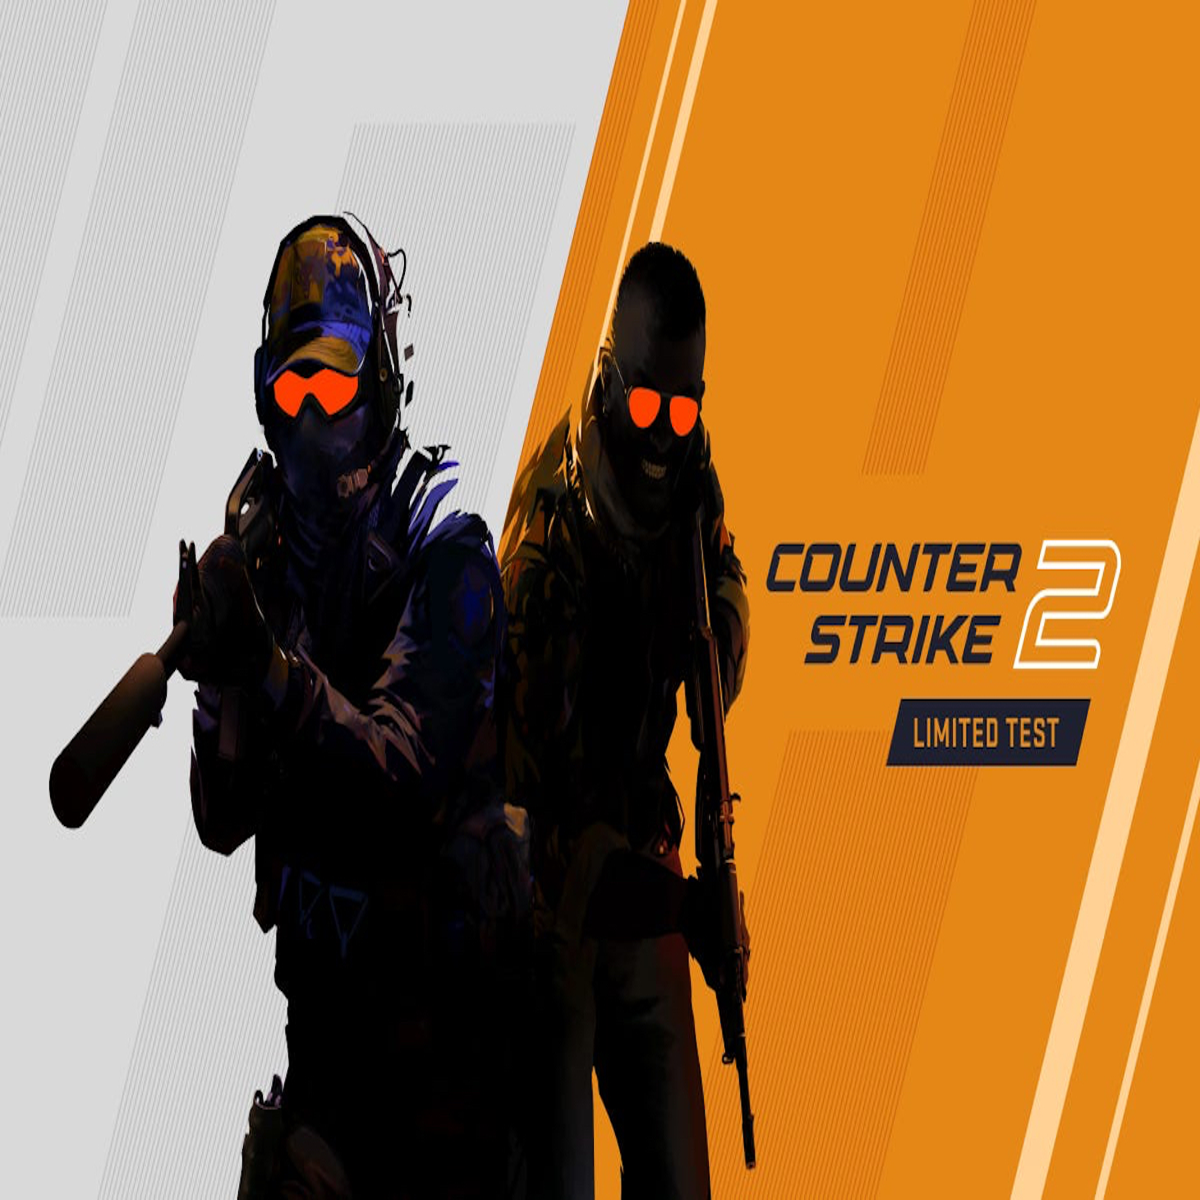 Counter-Strike 2 potentially ready for release soon - GadgetMatch